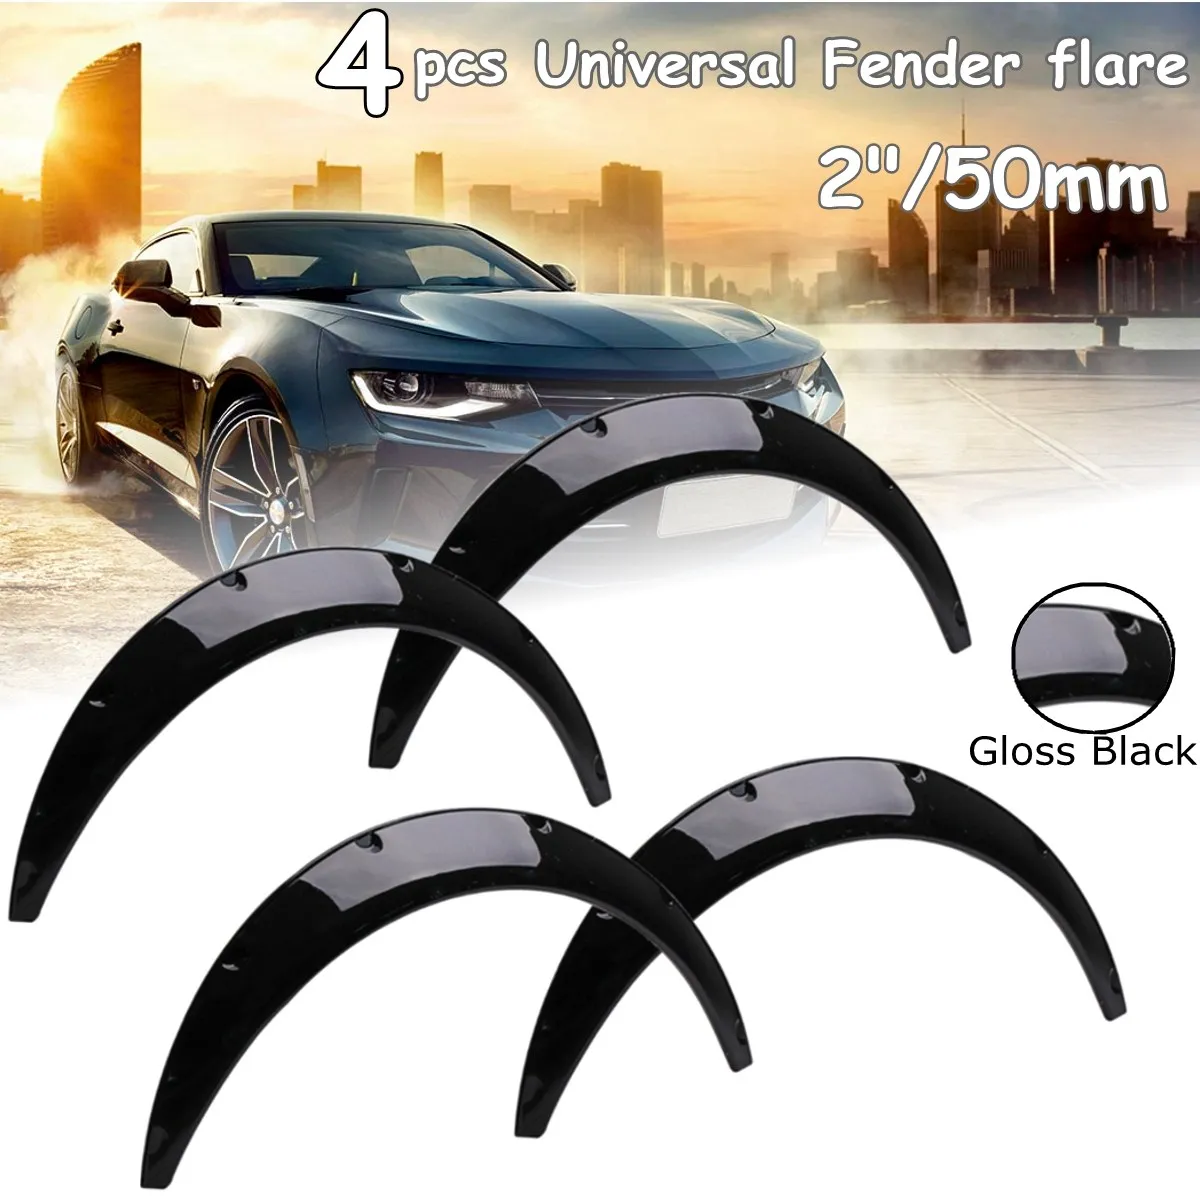 

4Pcs 2inch Universal Gloss Black Flexible Car Body For Fender Flares Extension Wide Wheel Arches